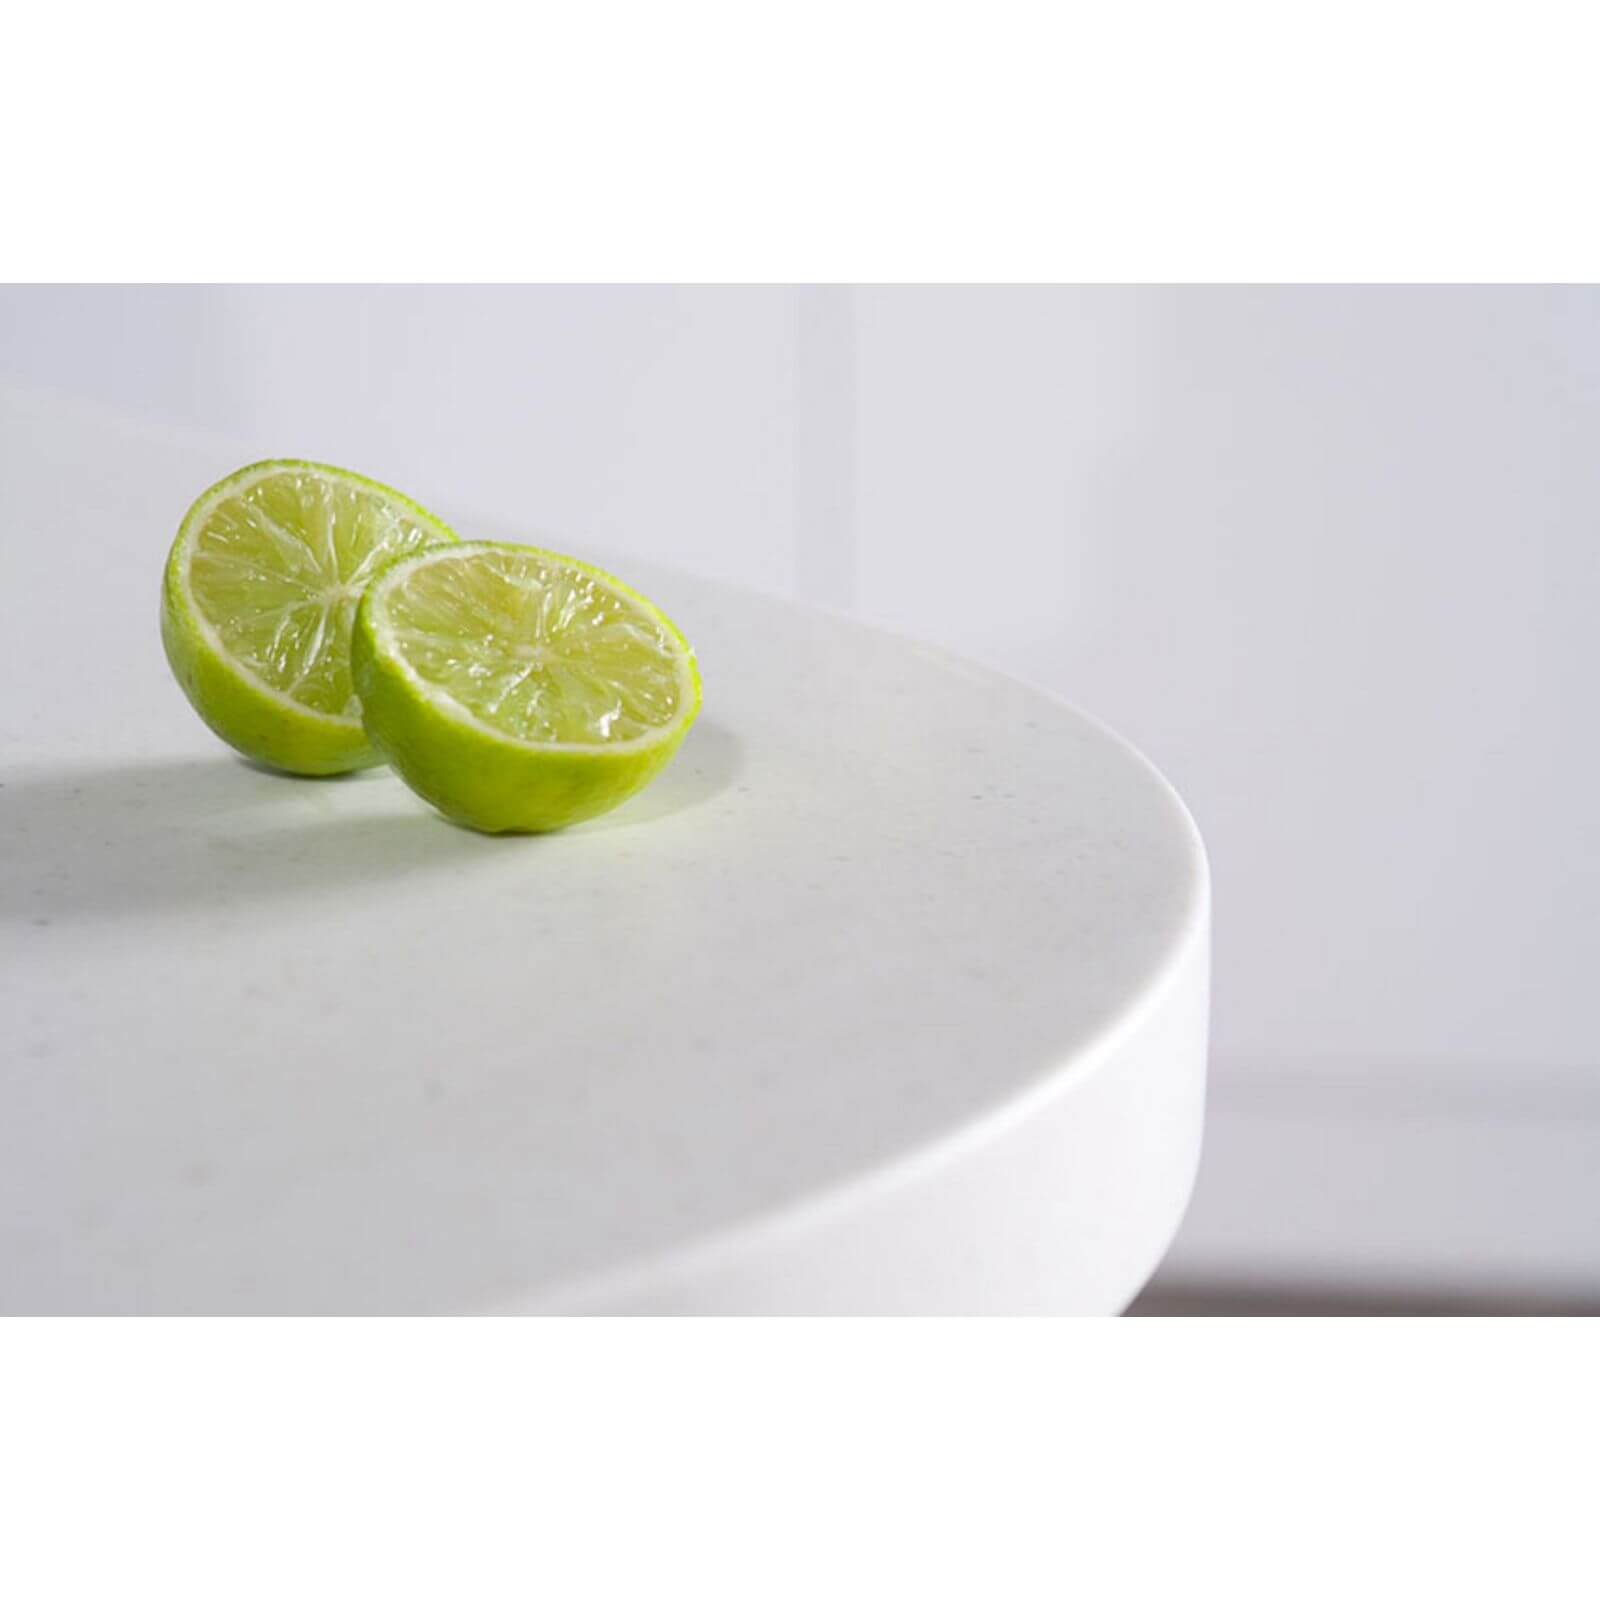 Maia Calcite Kitchen Sink Worktop - Acrylic Super Large Left Hand Bowl - 3600 x 650 x 28mm